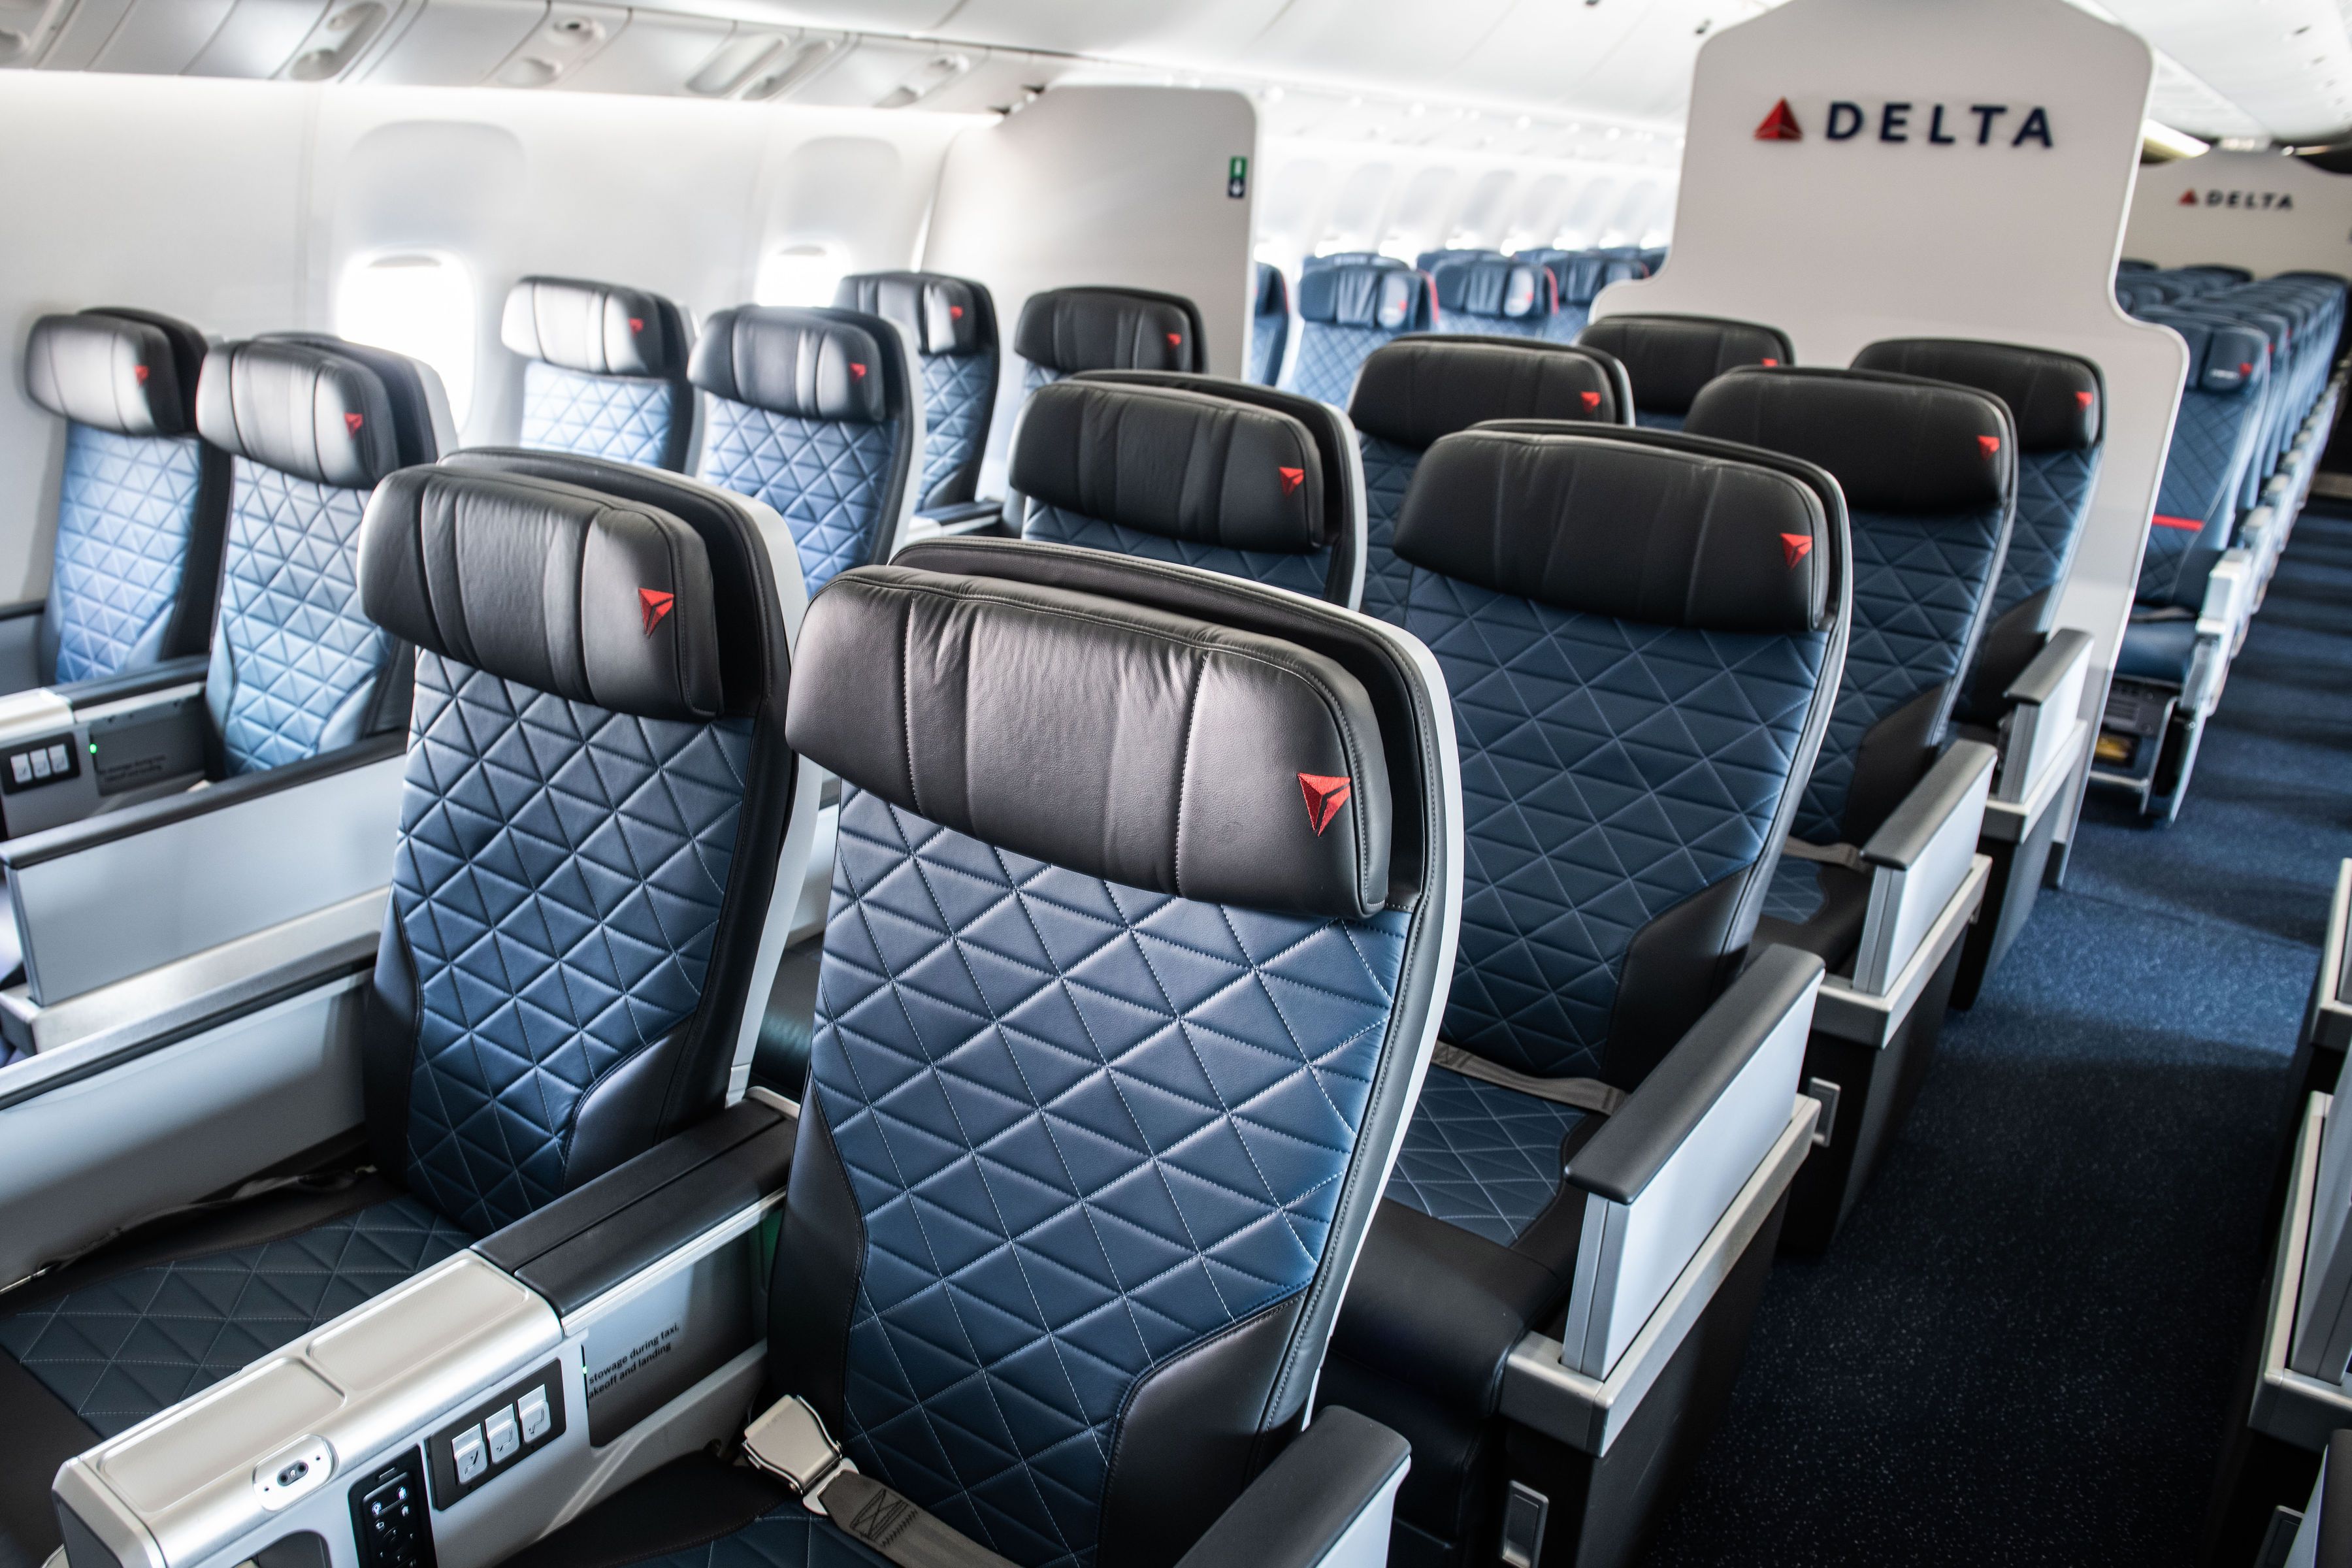 Inside the Delta Air Lines Premium Select Cabin.